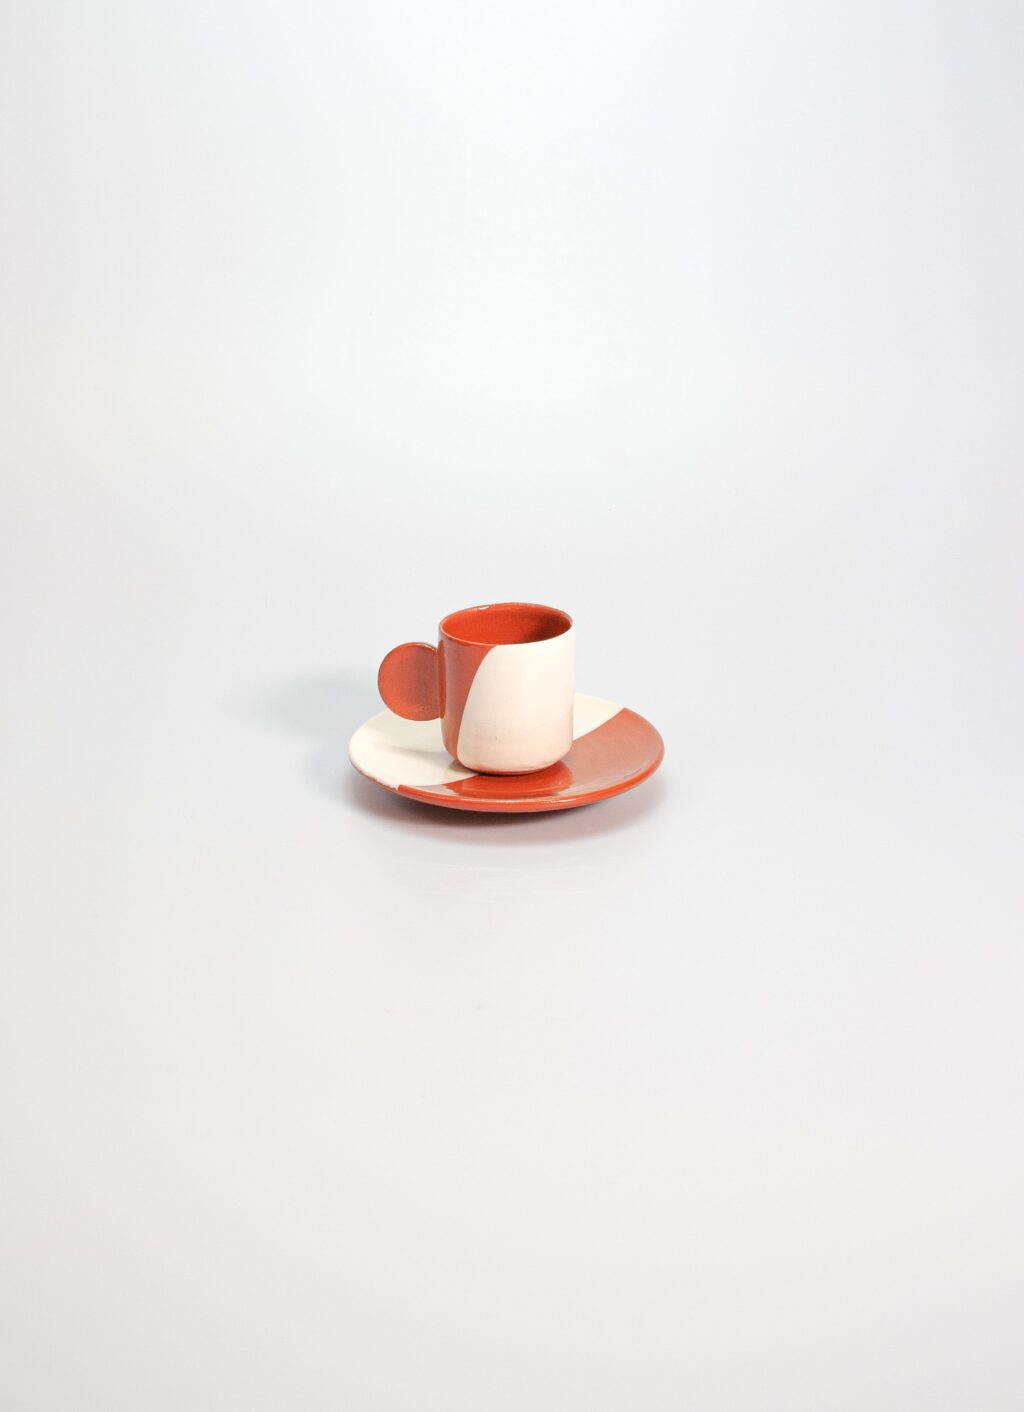 Casa Cubista - Dipped Espresso Cup and Saucer - Terracotta and White